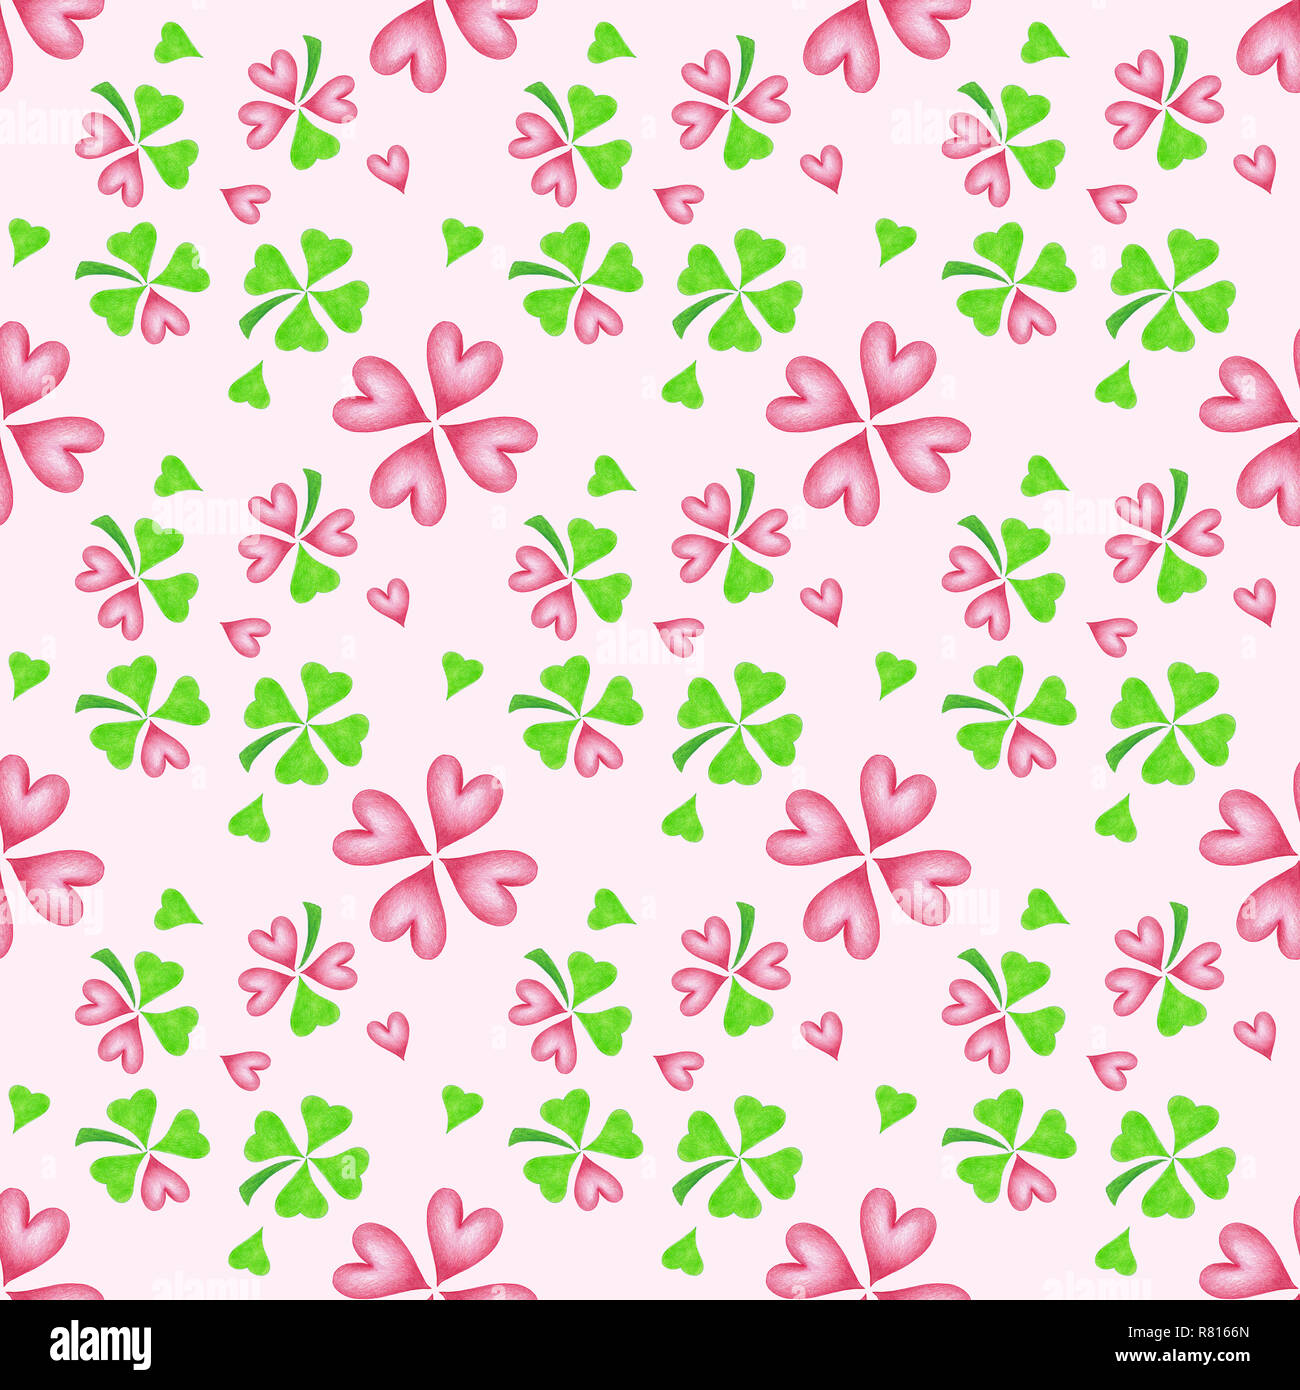 Wallpaper, wrapping paper, seamless pattern, hearts and clover, cloverleaves on pink background, Germany Stock Photo